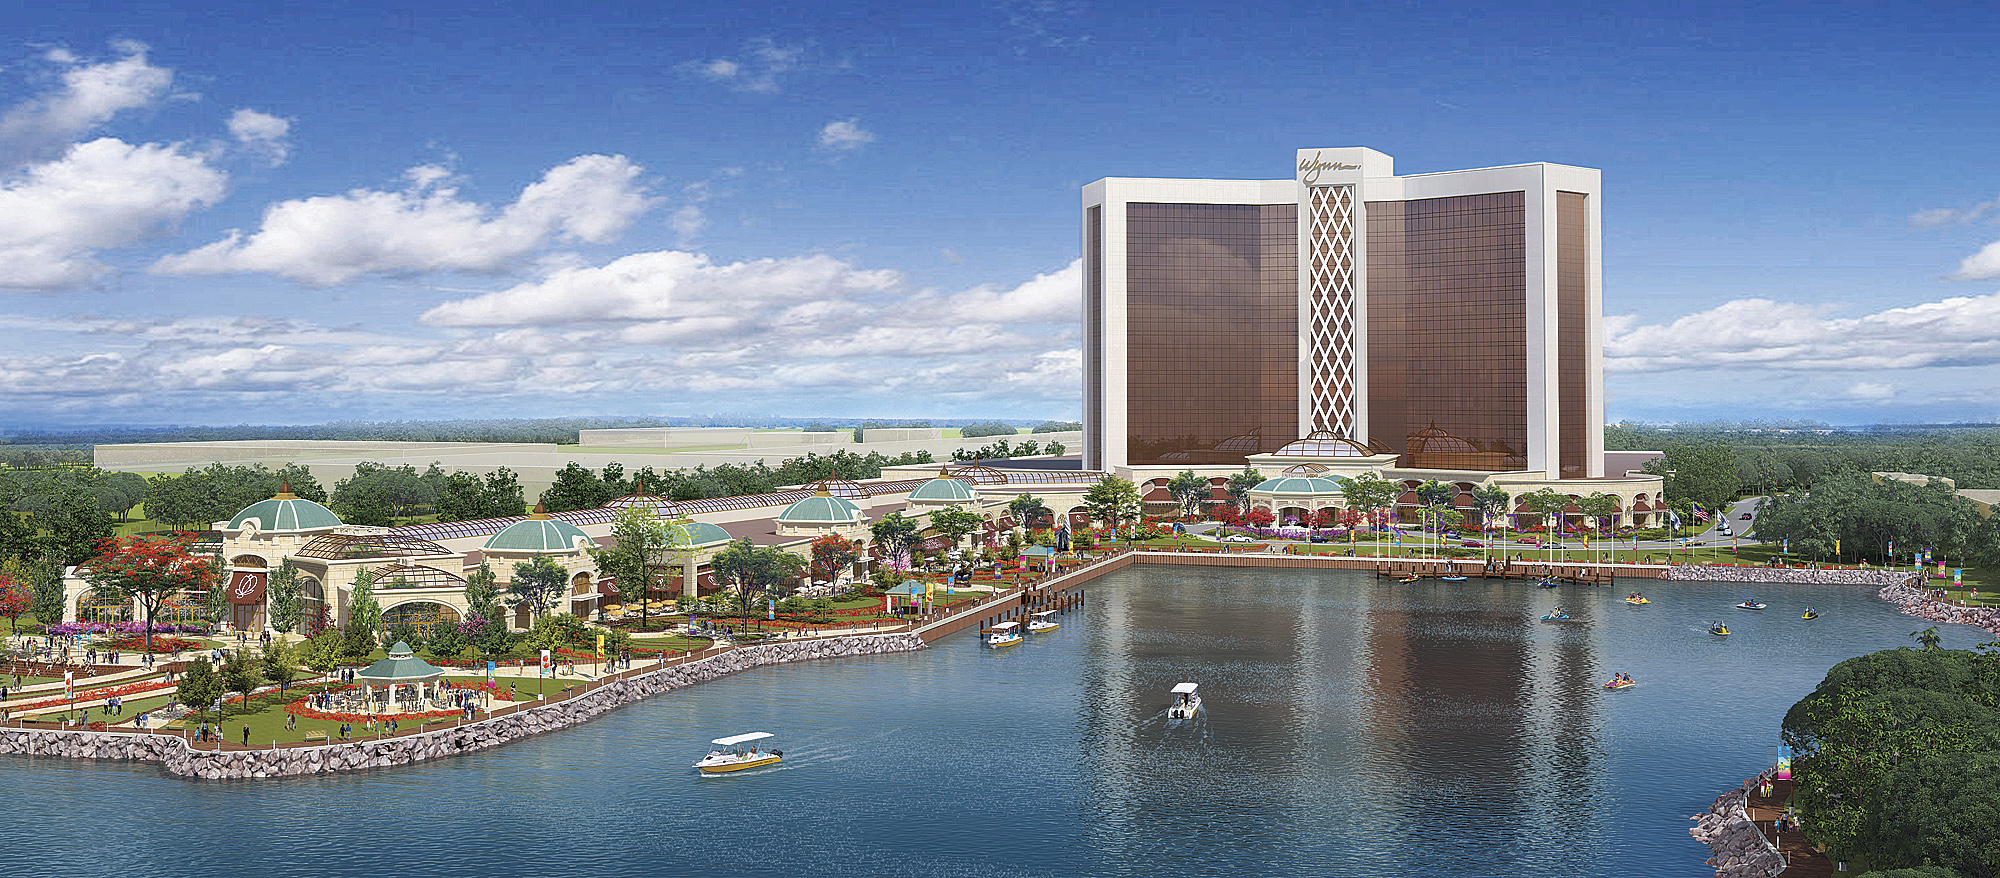 This file artist's rendering released March 27, 2013 by Wynn Resorts shows a proposed resort casino on the banks of the Mystic River in Everett, Mass. (AP)